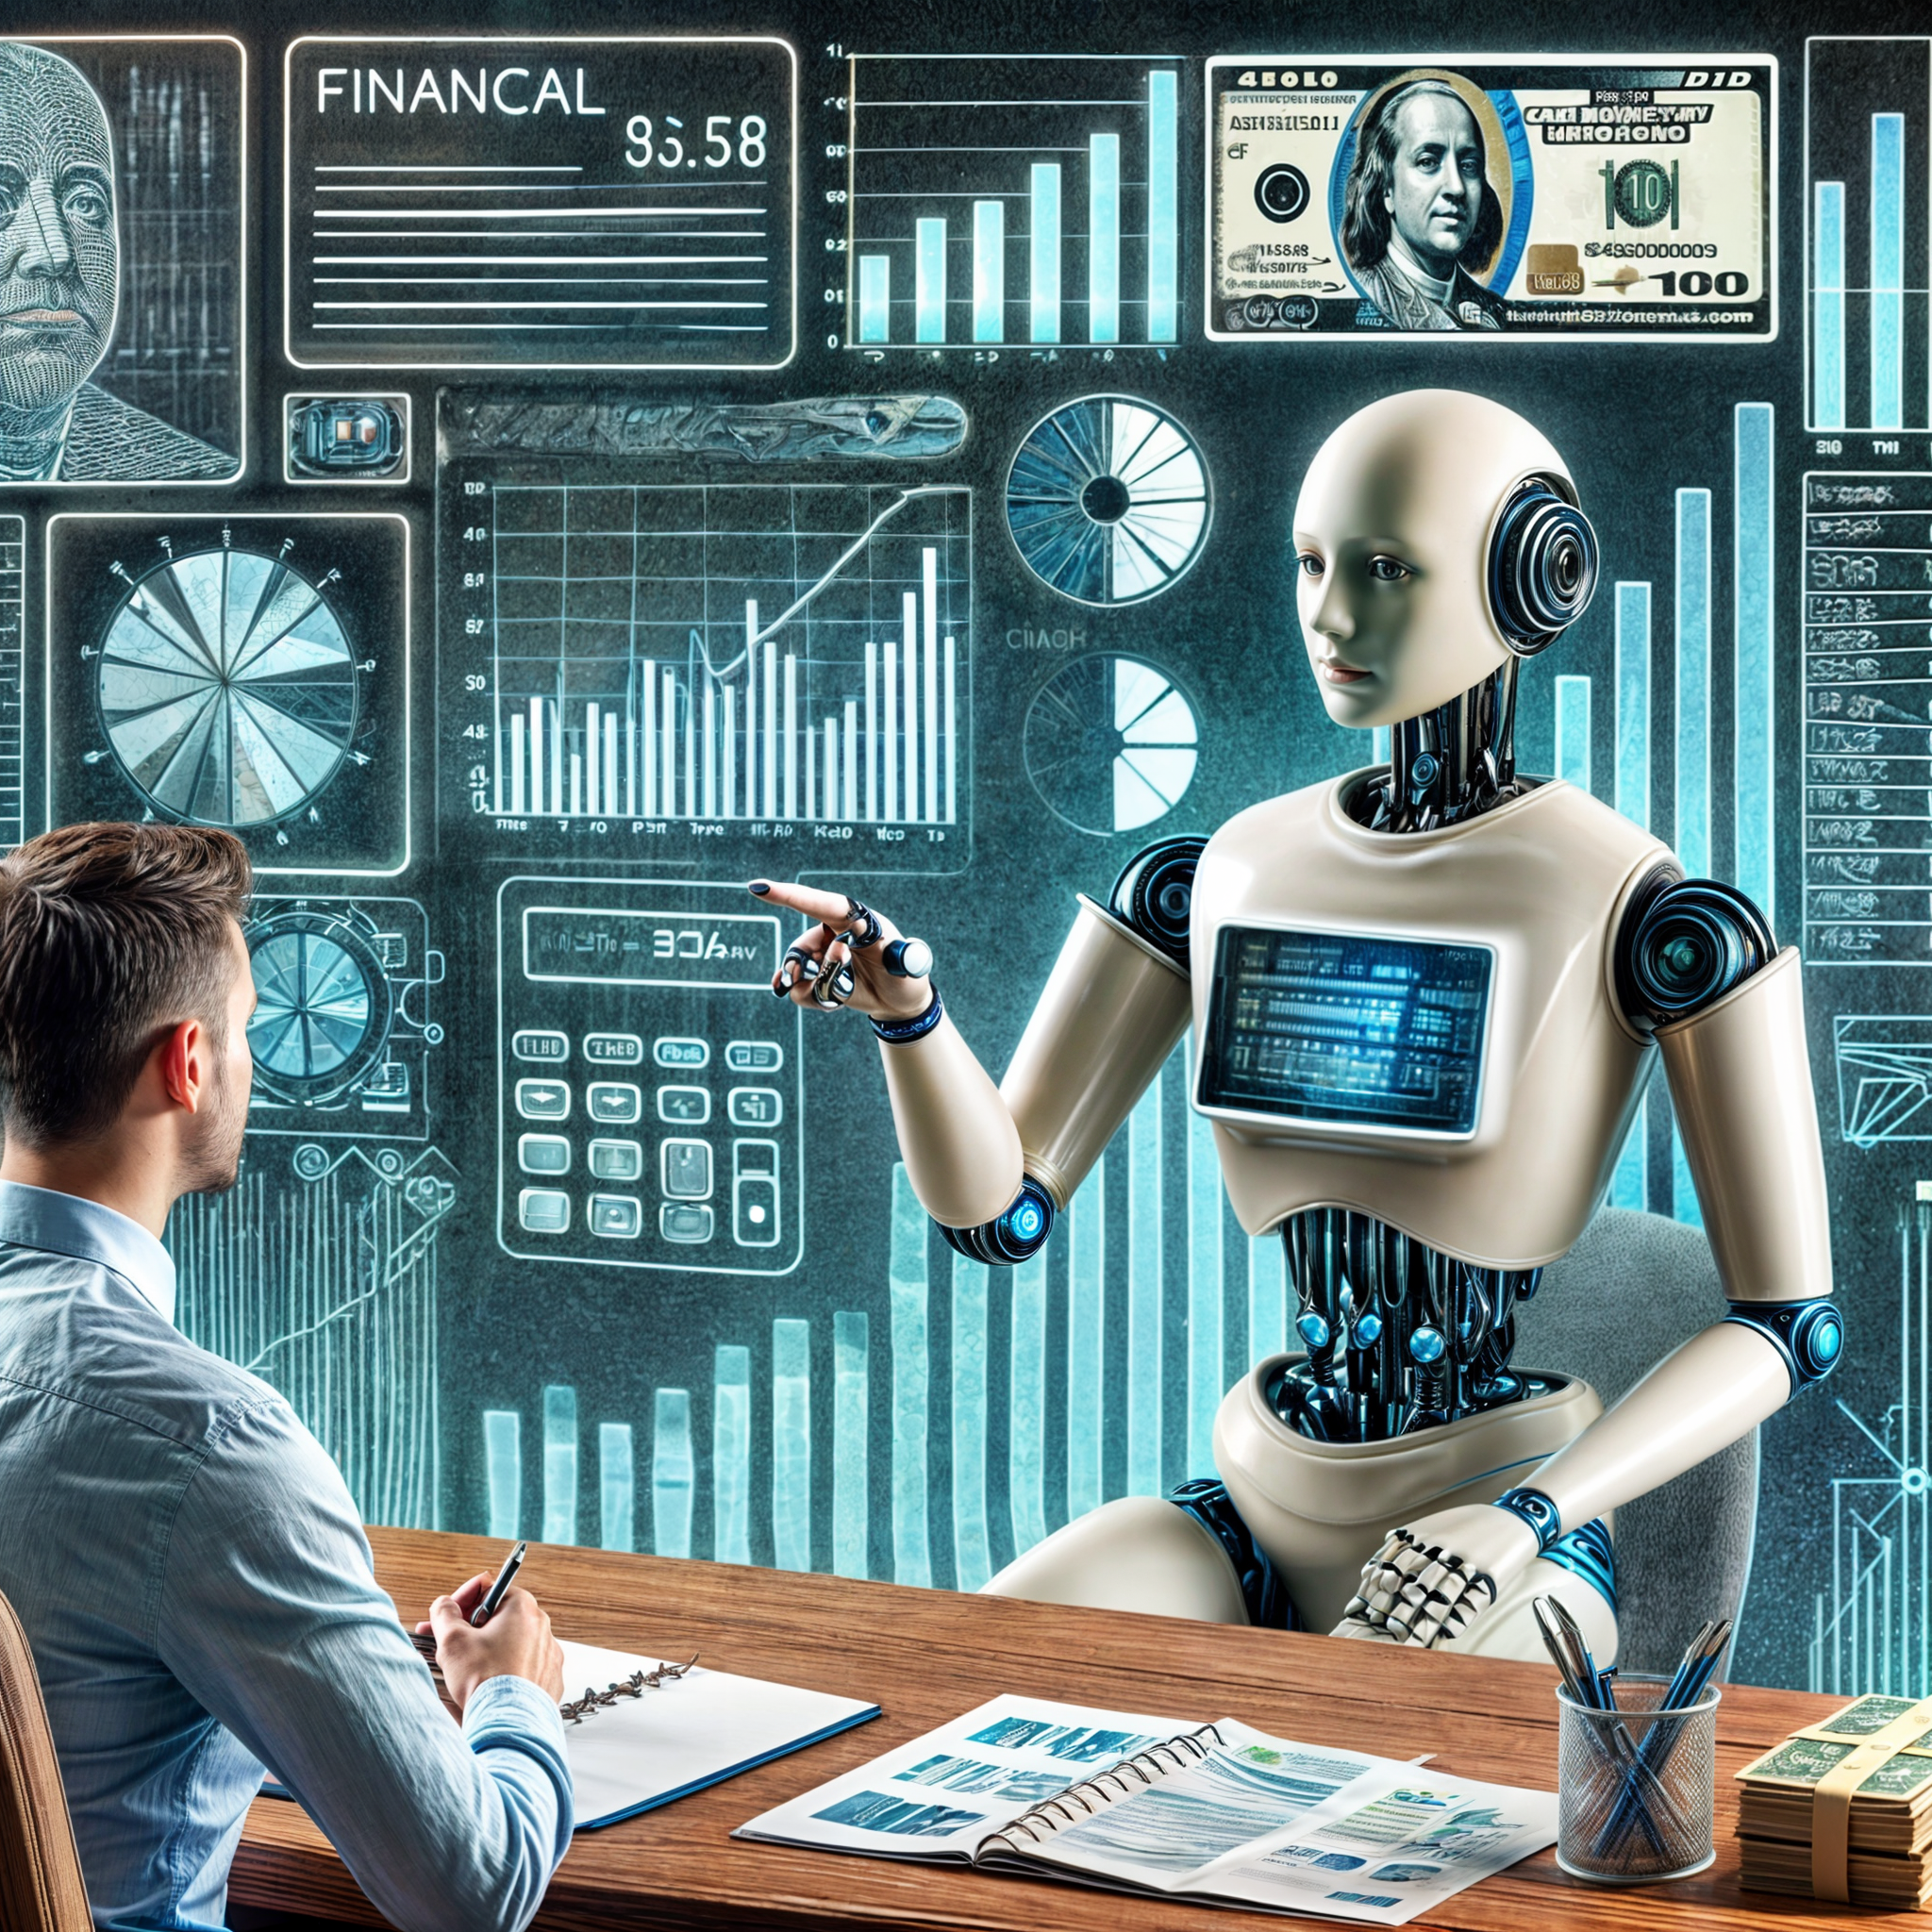 Case Study: AI Chatbots for Investment Simulations and Advice